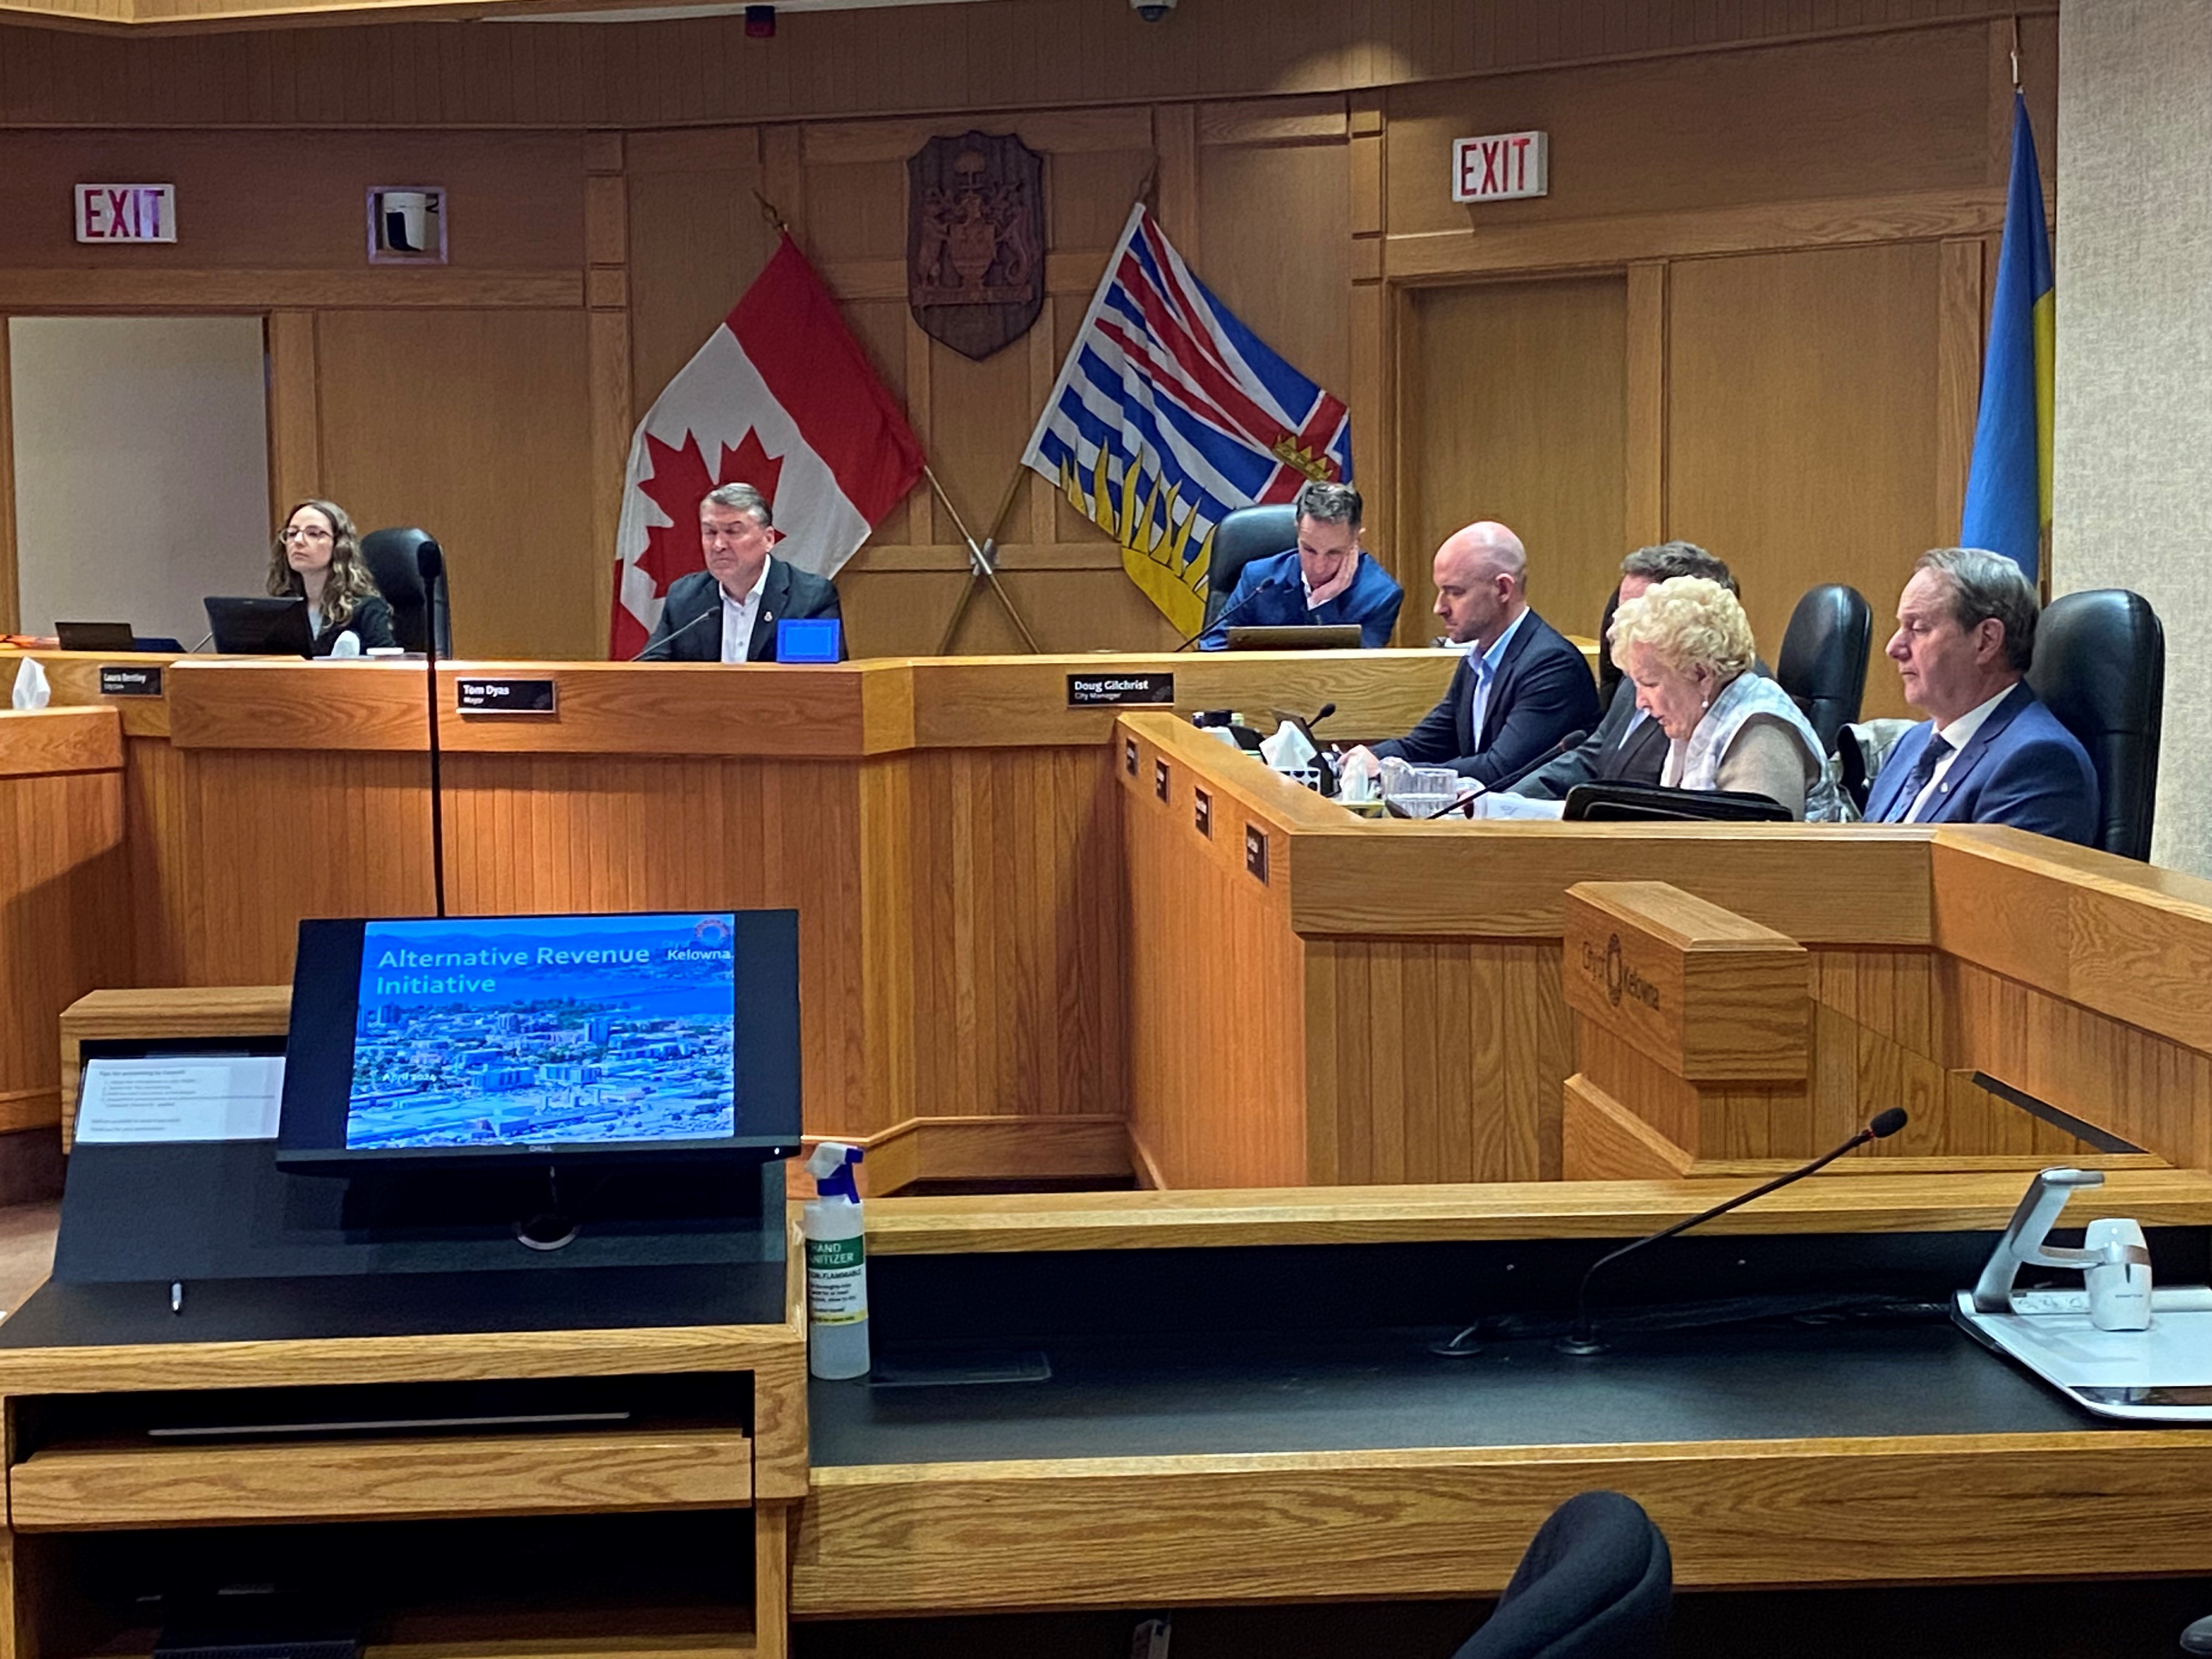 Kelowna, B.C. city council finalizes pay hike in close vote